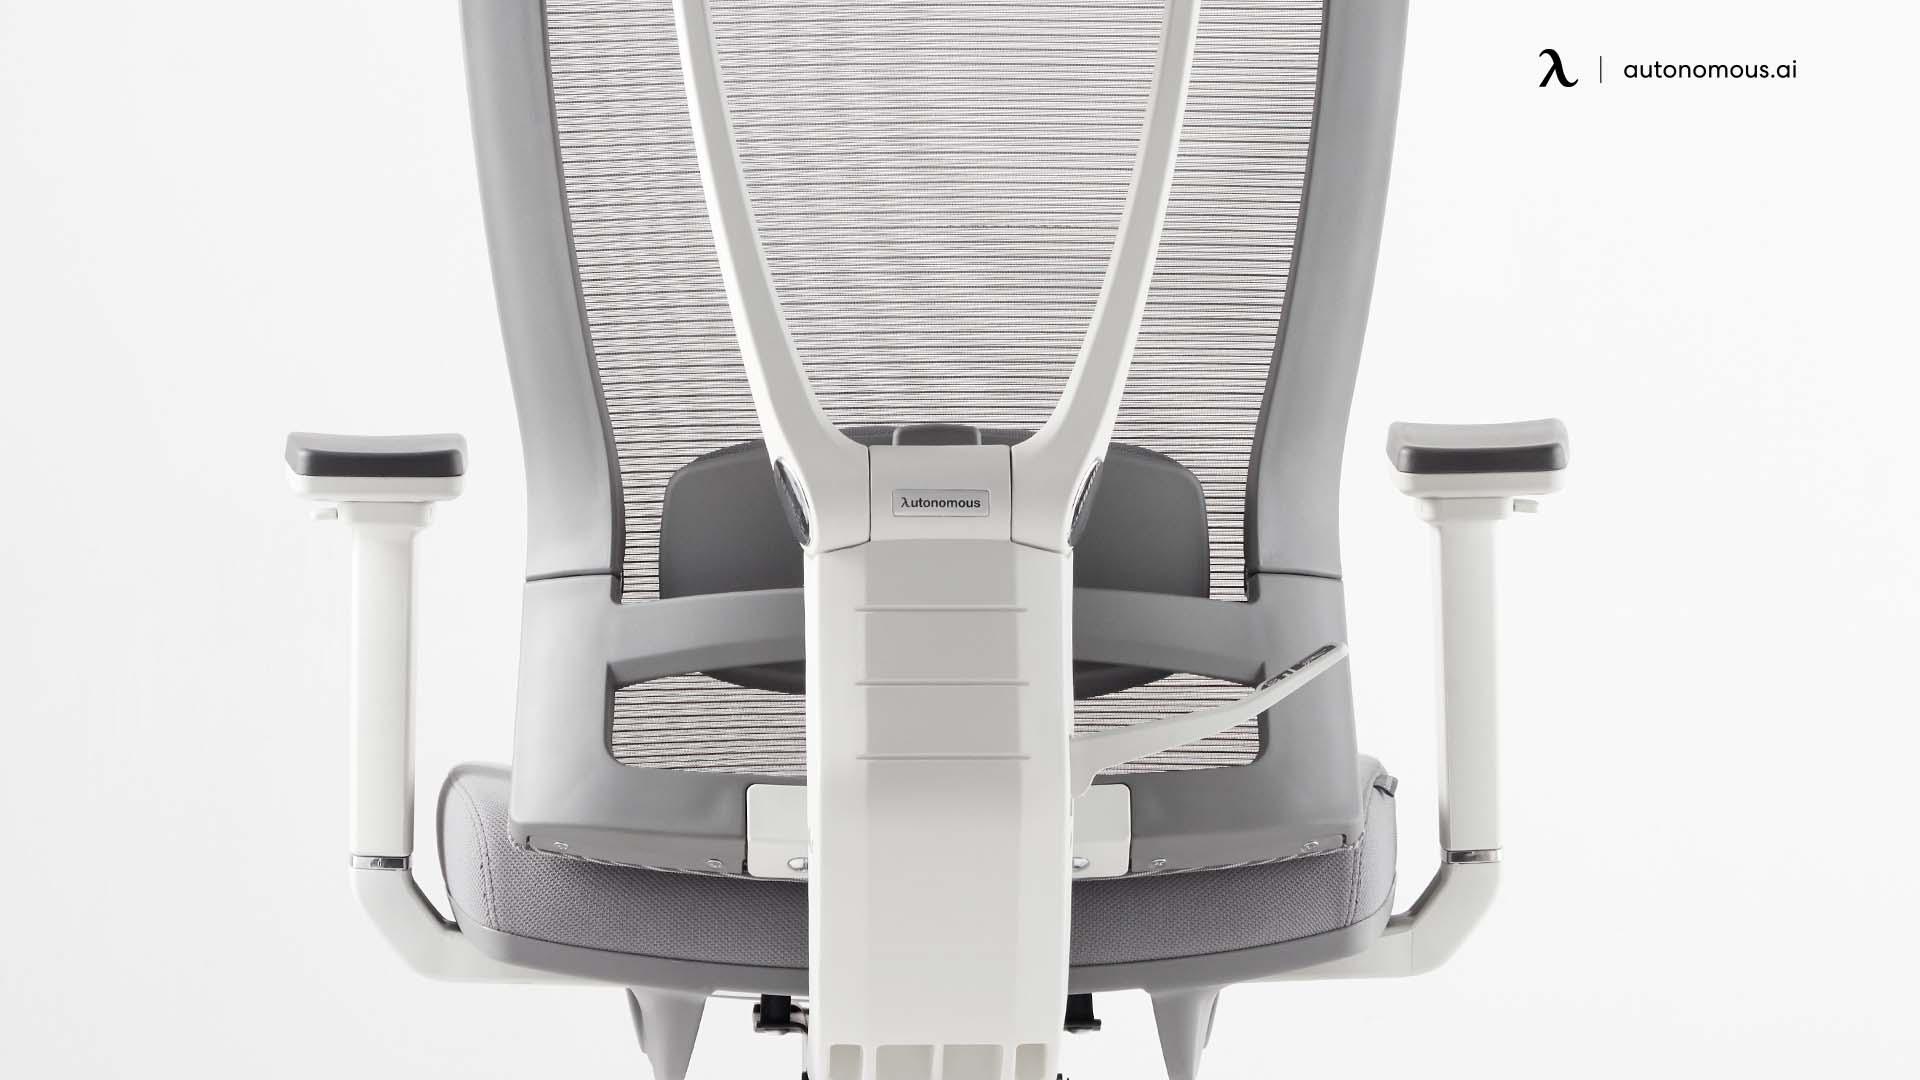 Built-in or Additional Lumbar Support on Chairs?